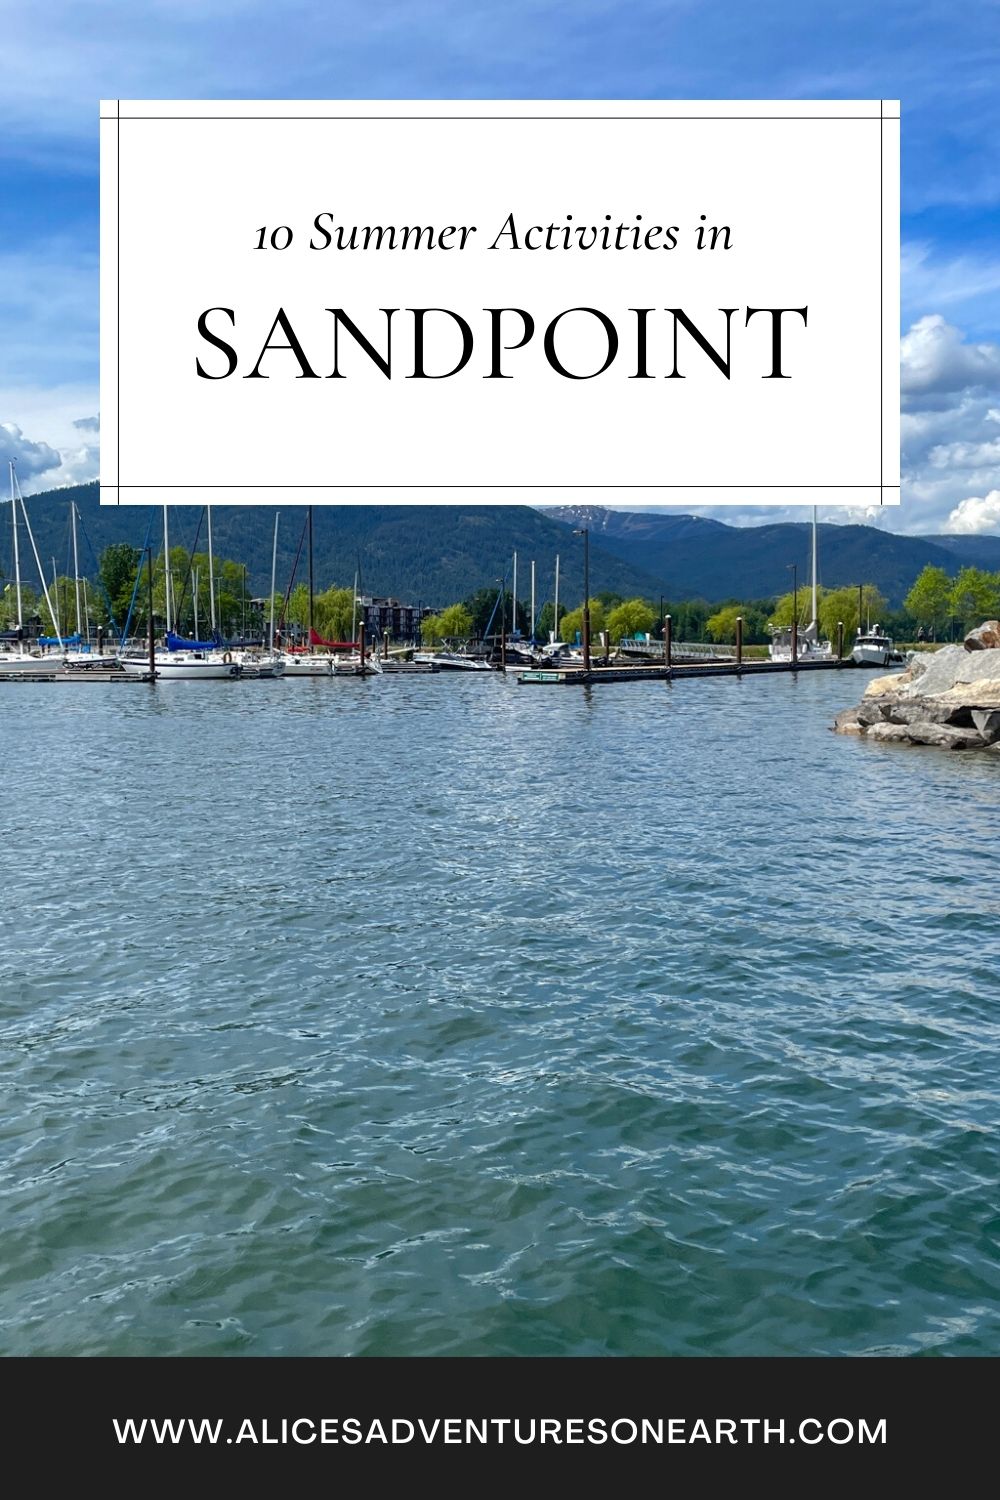 1o things to do in summer in sandpoint Idaho. #travel #idaho #lakeside #sandpoint 